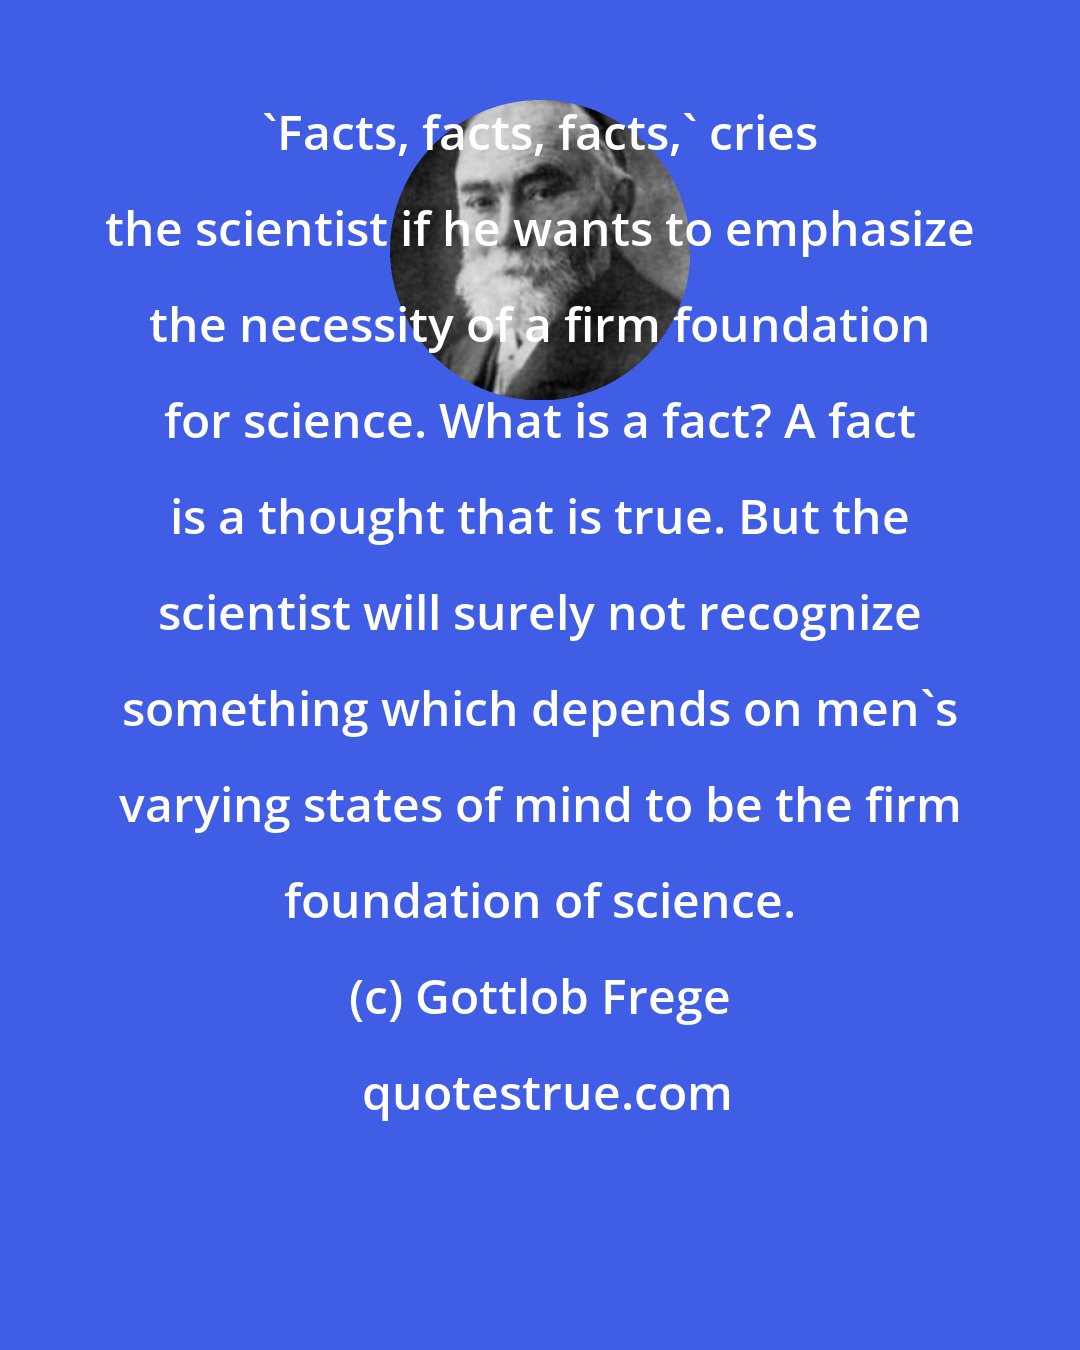 Gottlob Frege: 'Facts, facts, facts,' cries the scientist if he wants to emphasize the necessity of a firm foundation for science. What is a fact? A fact is a thought that is true. But the scientist will surely not recognize something which depends on men's varying states of mind to be the firm foundation of science.